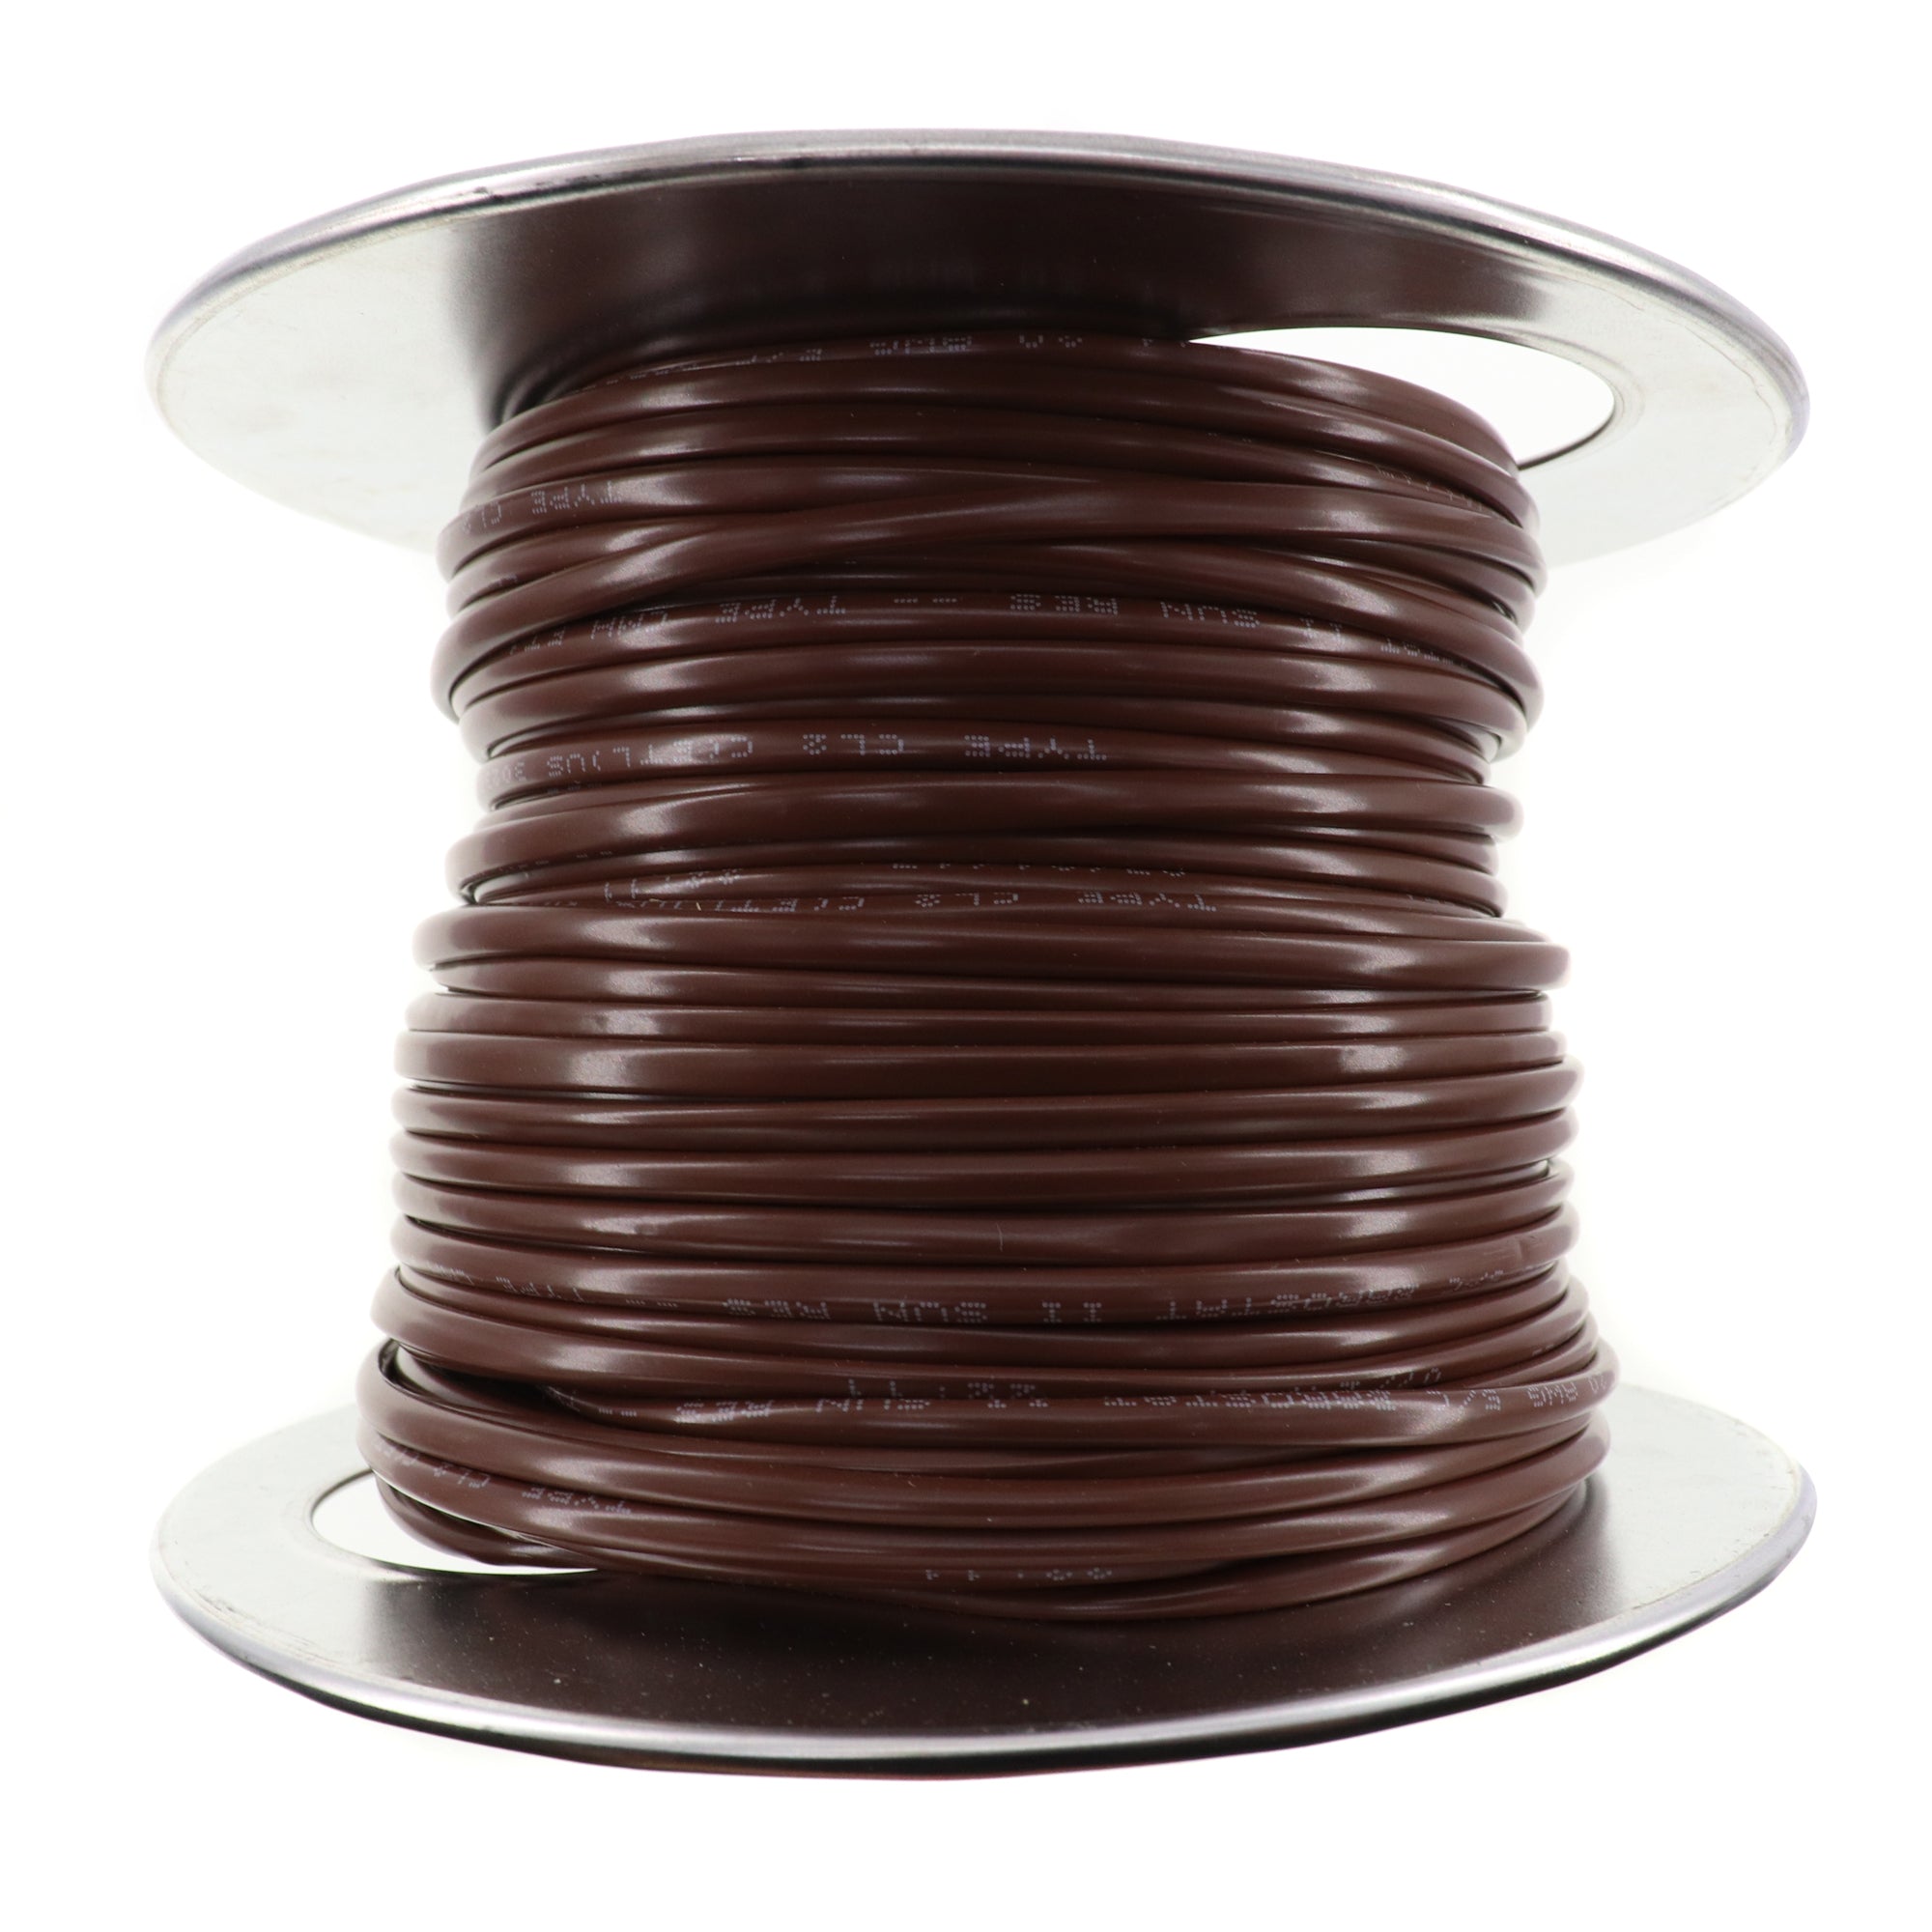 Coleman Cable, COLEMAN CABLE 552050407 TSTAT CONTROL WIRE, 20/5C, BROWN, 250-FEET